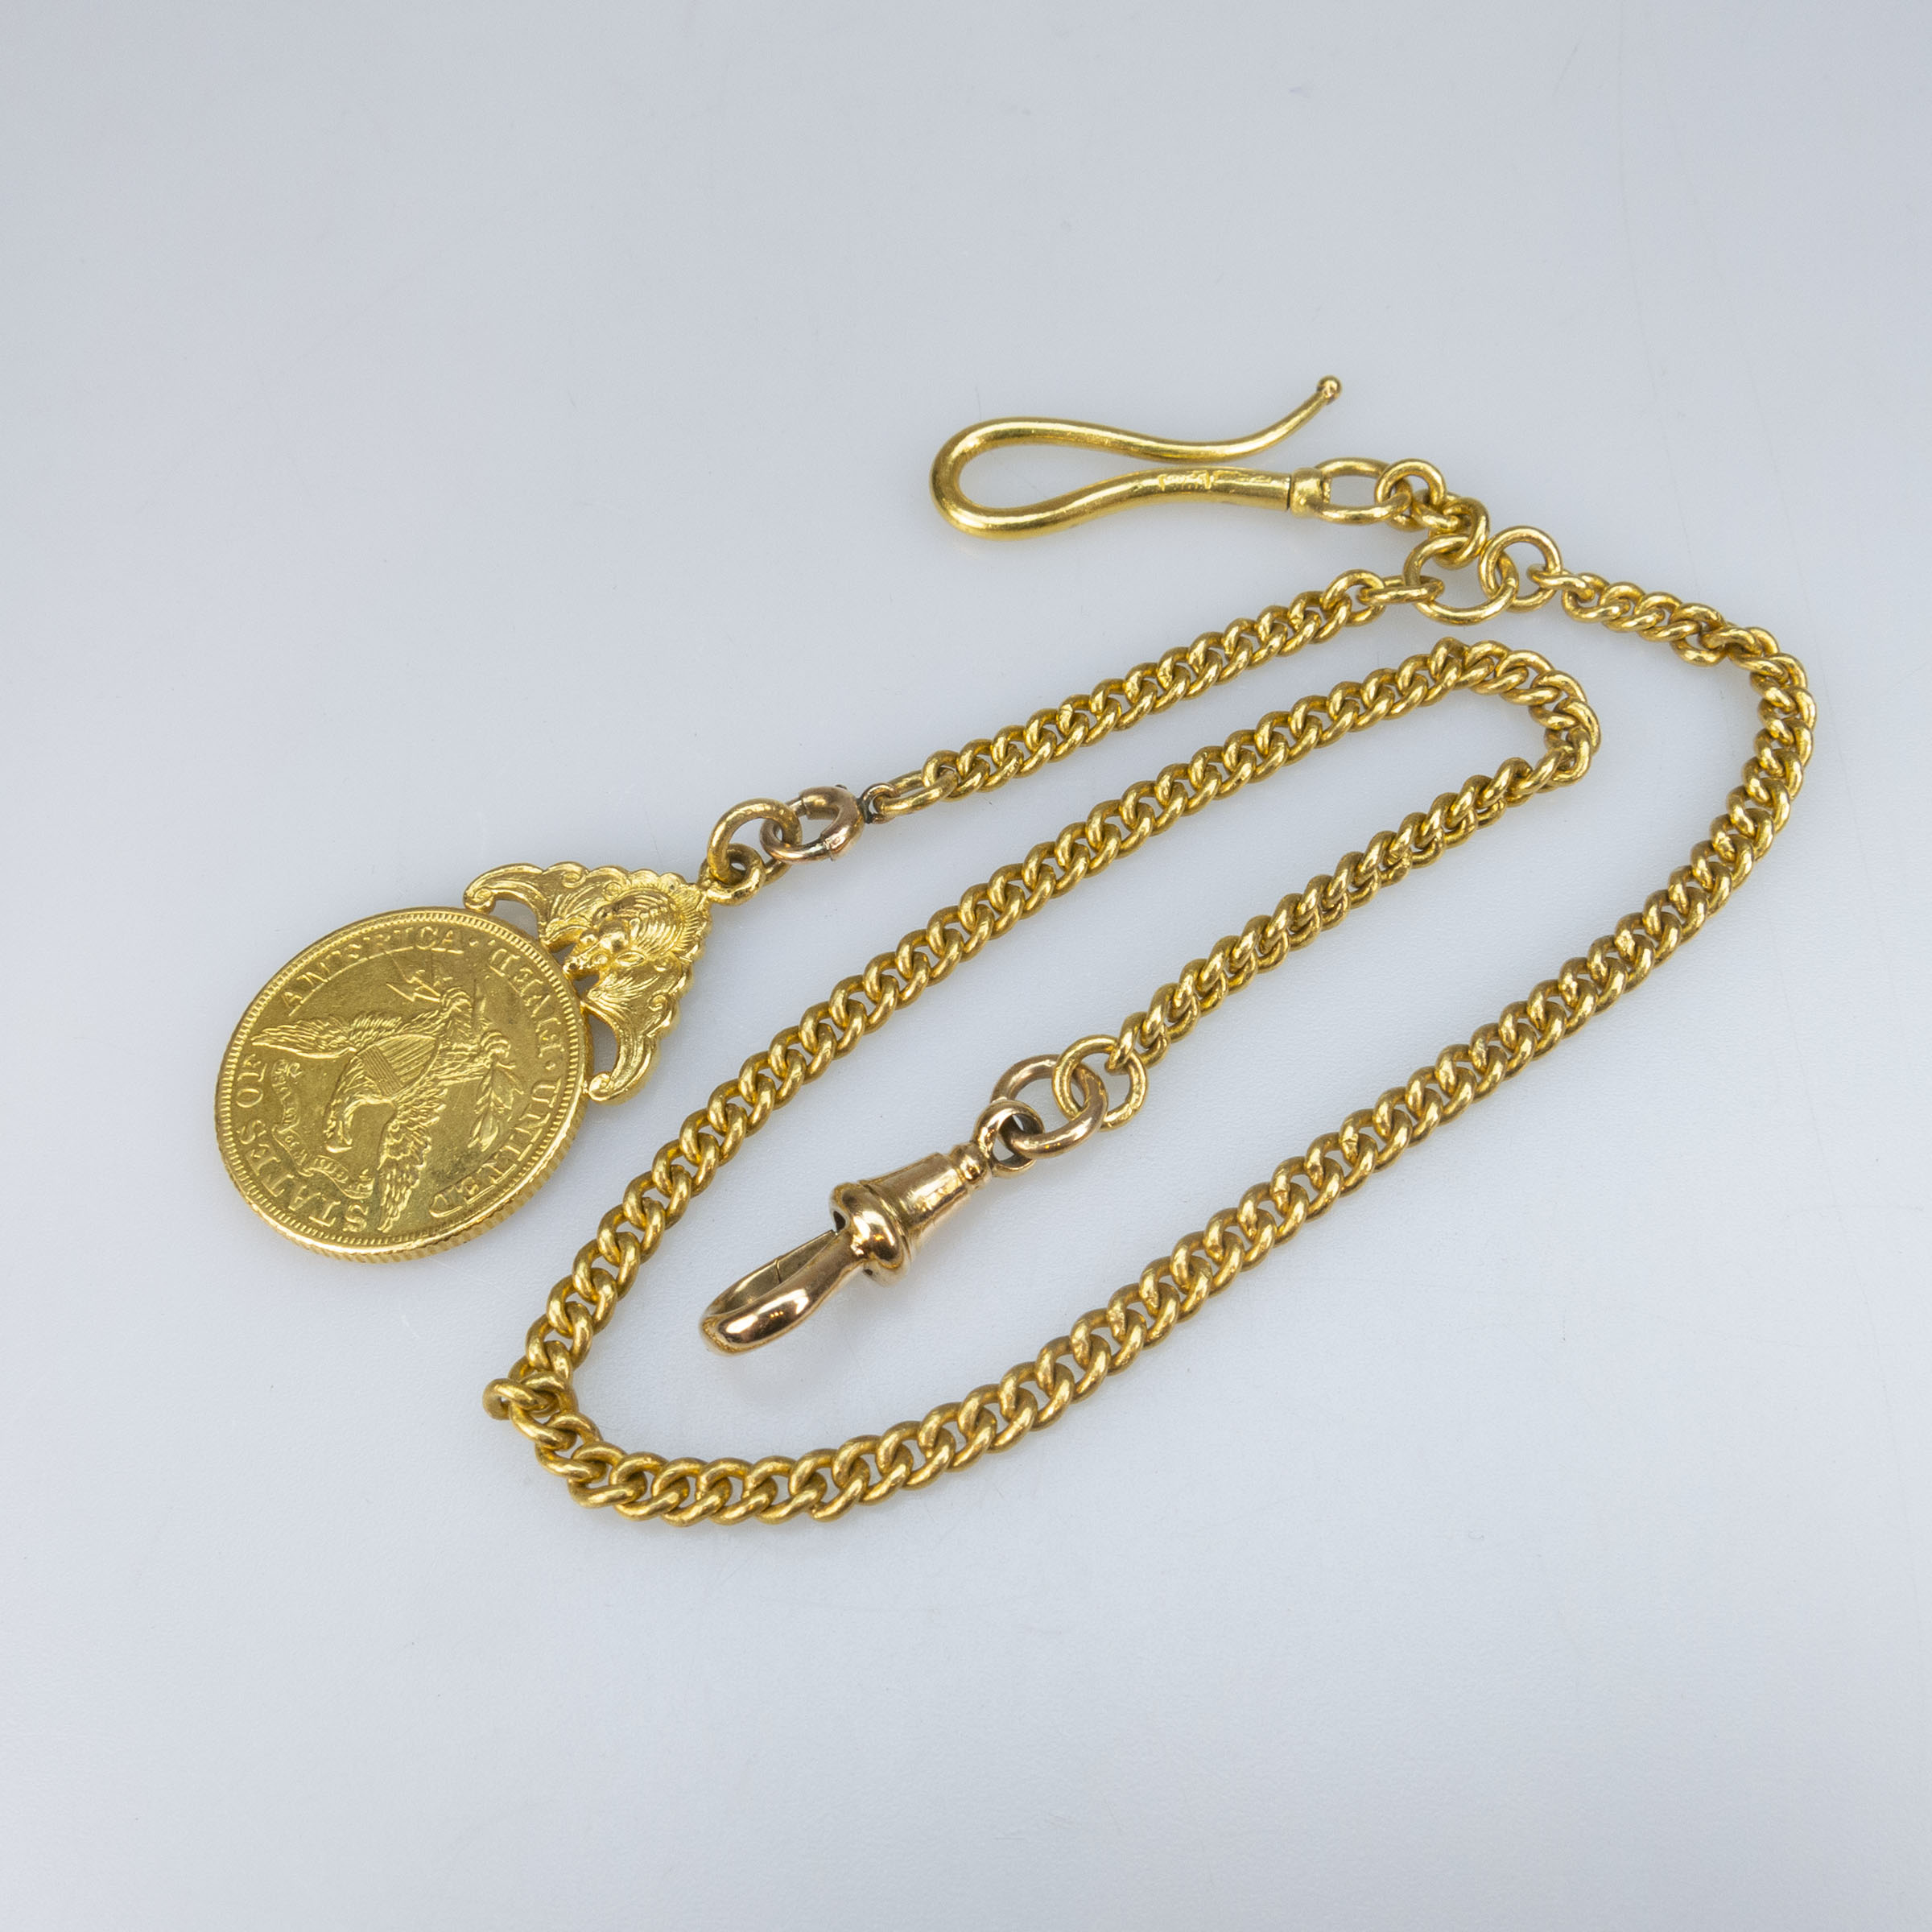 22k Yellow Gold Curb Link Watch Chain